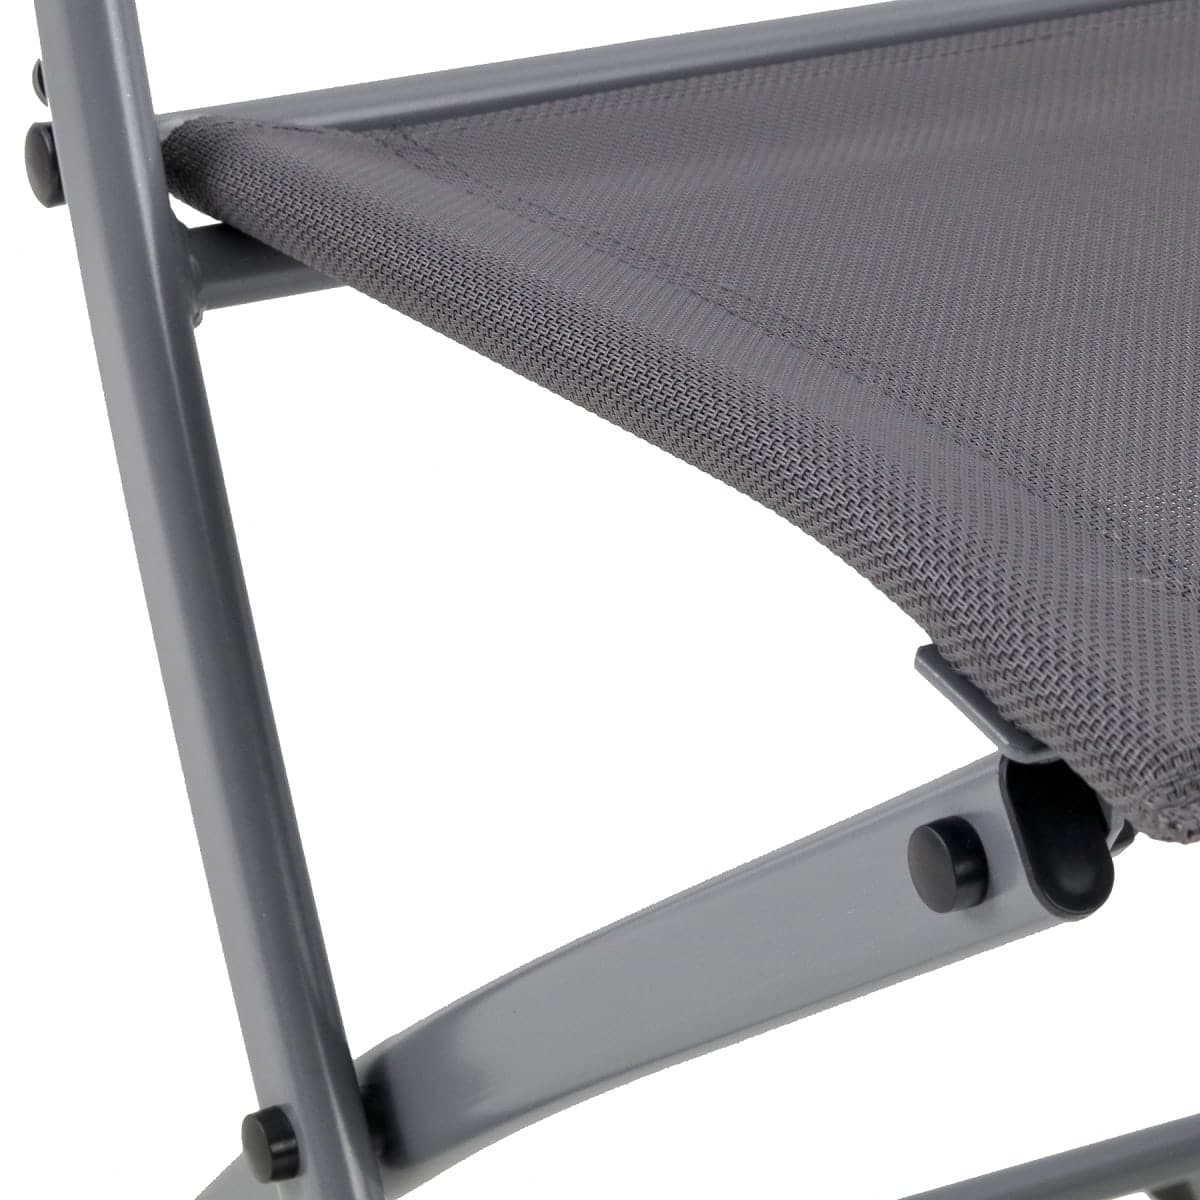 EMYS NATERIAL FOLDING CHAIR STEEL SEAT TEXTILENE ANTHRACITE 42X52XH83 - best price from Maltashopper.com BR500009531